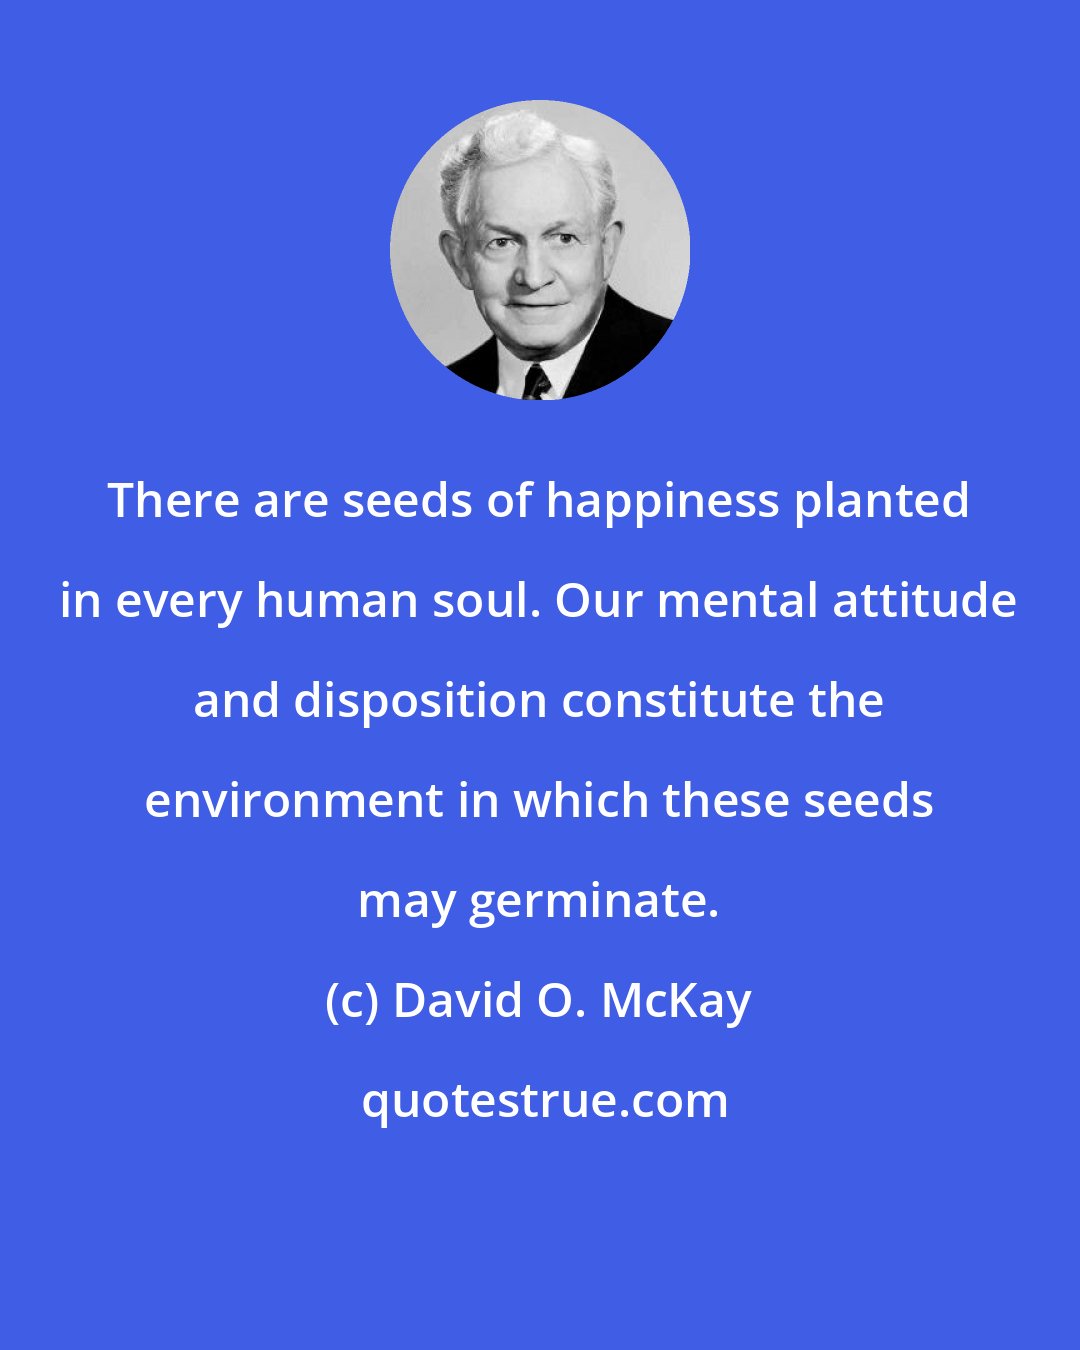 David O. McKay: There are seeds of happiness planted in every human soul. Our mental attitude and disposition constitute the environment in which these seeds may germinate.